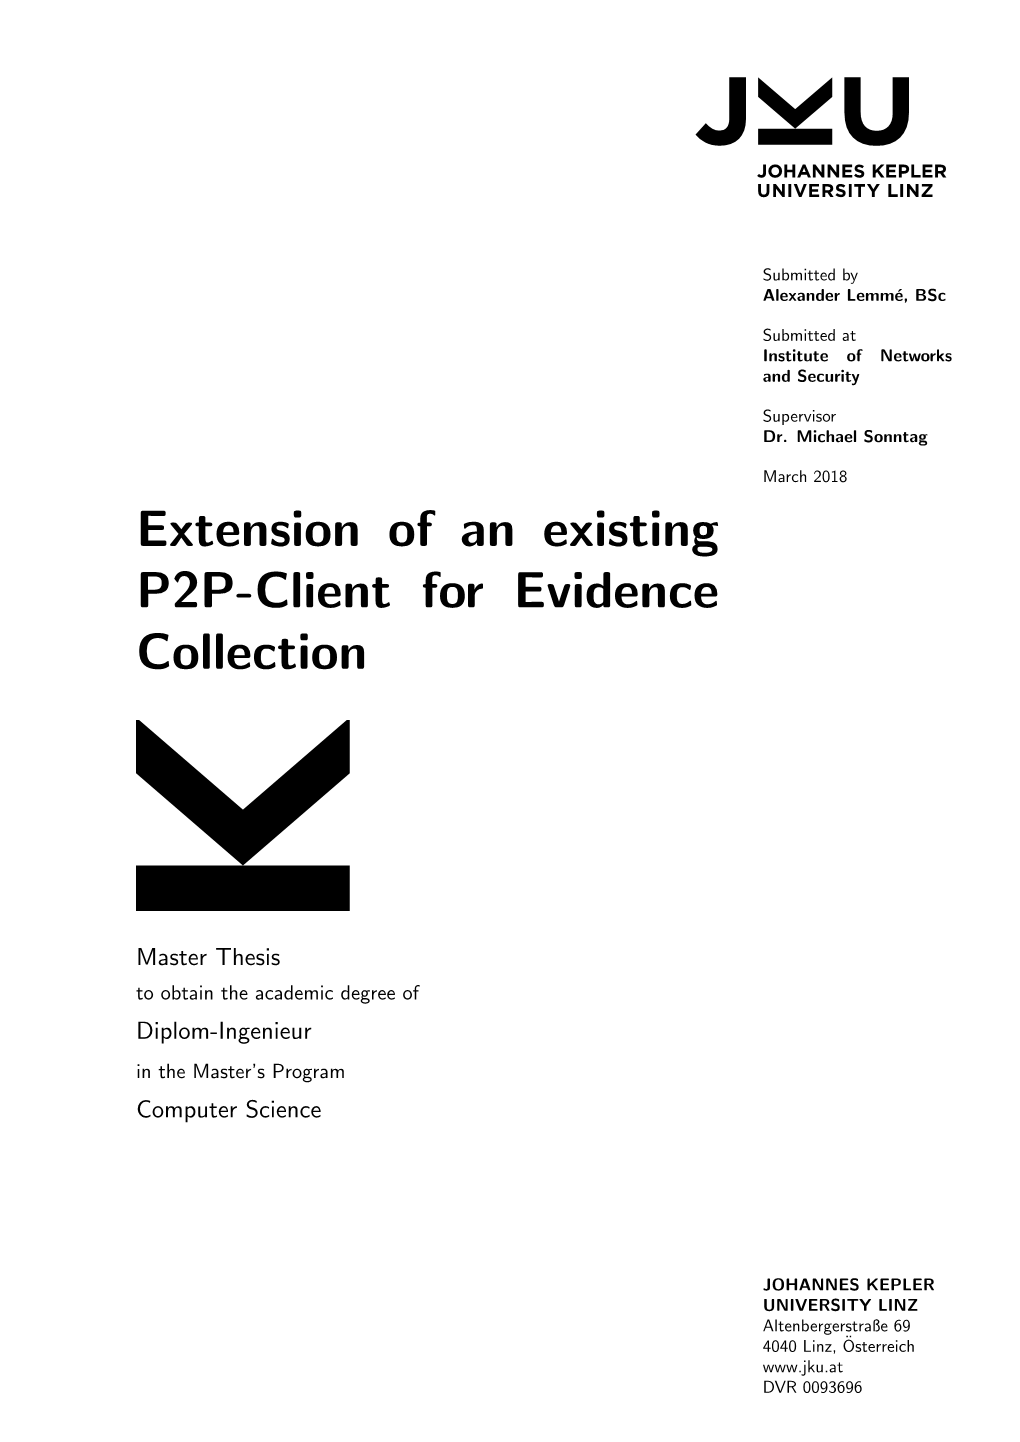 Extension of an Existing P2P-Client for Evidence Collection